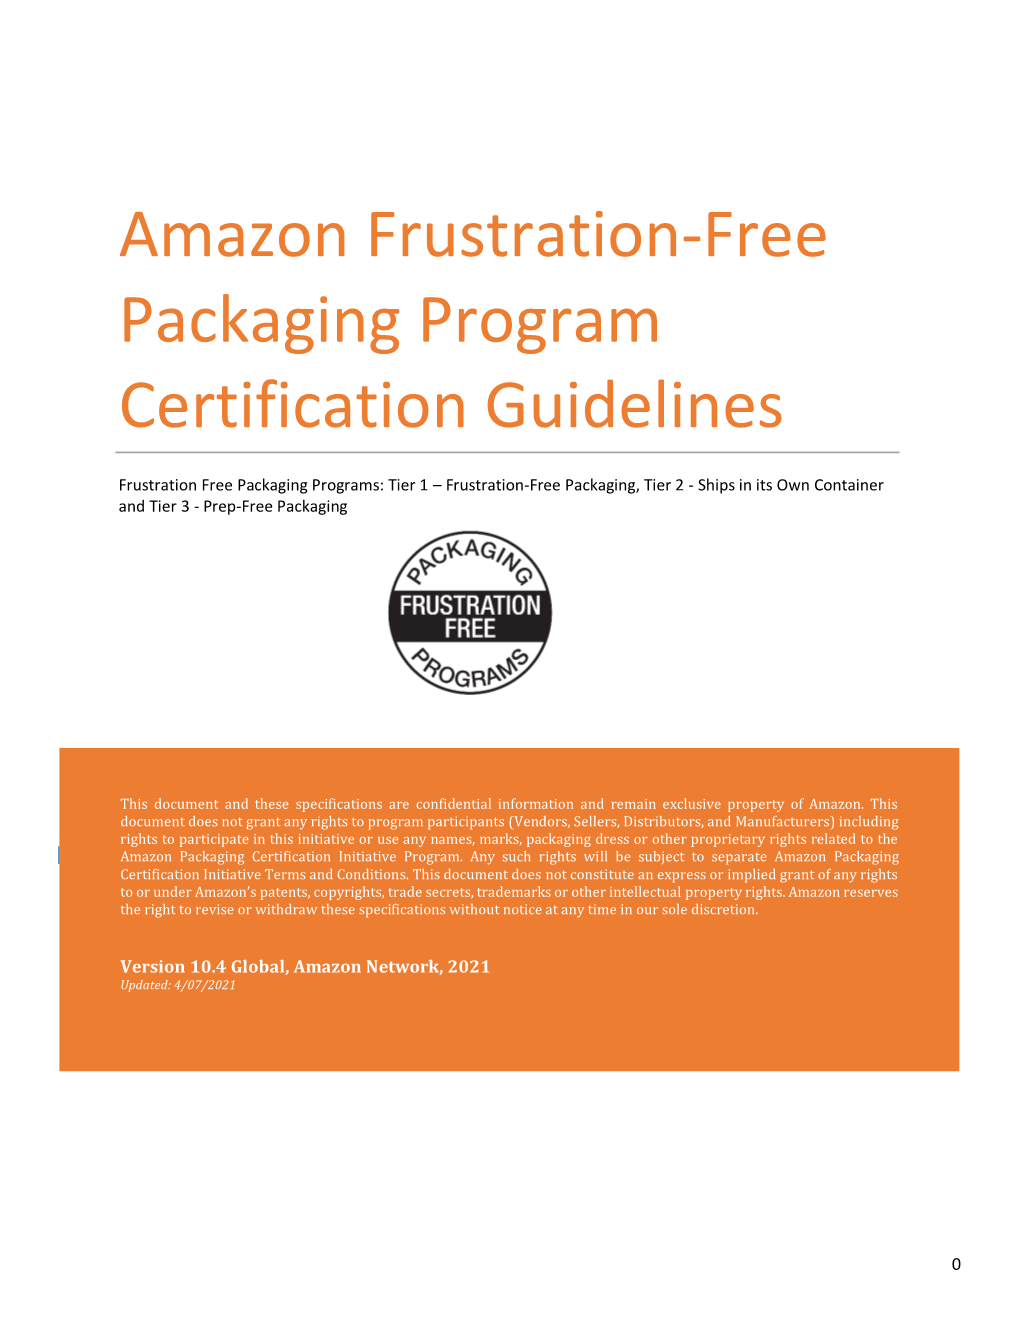 Amazon Frustration-Free Packaging Program Certification Guidelines